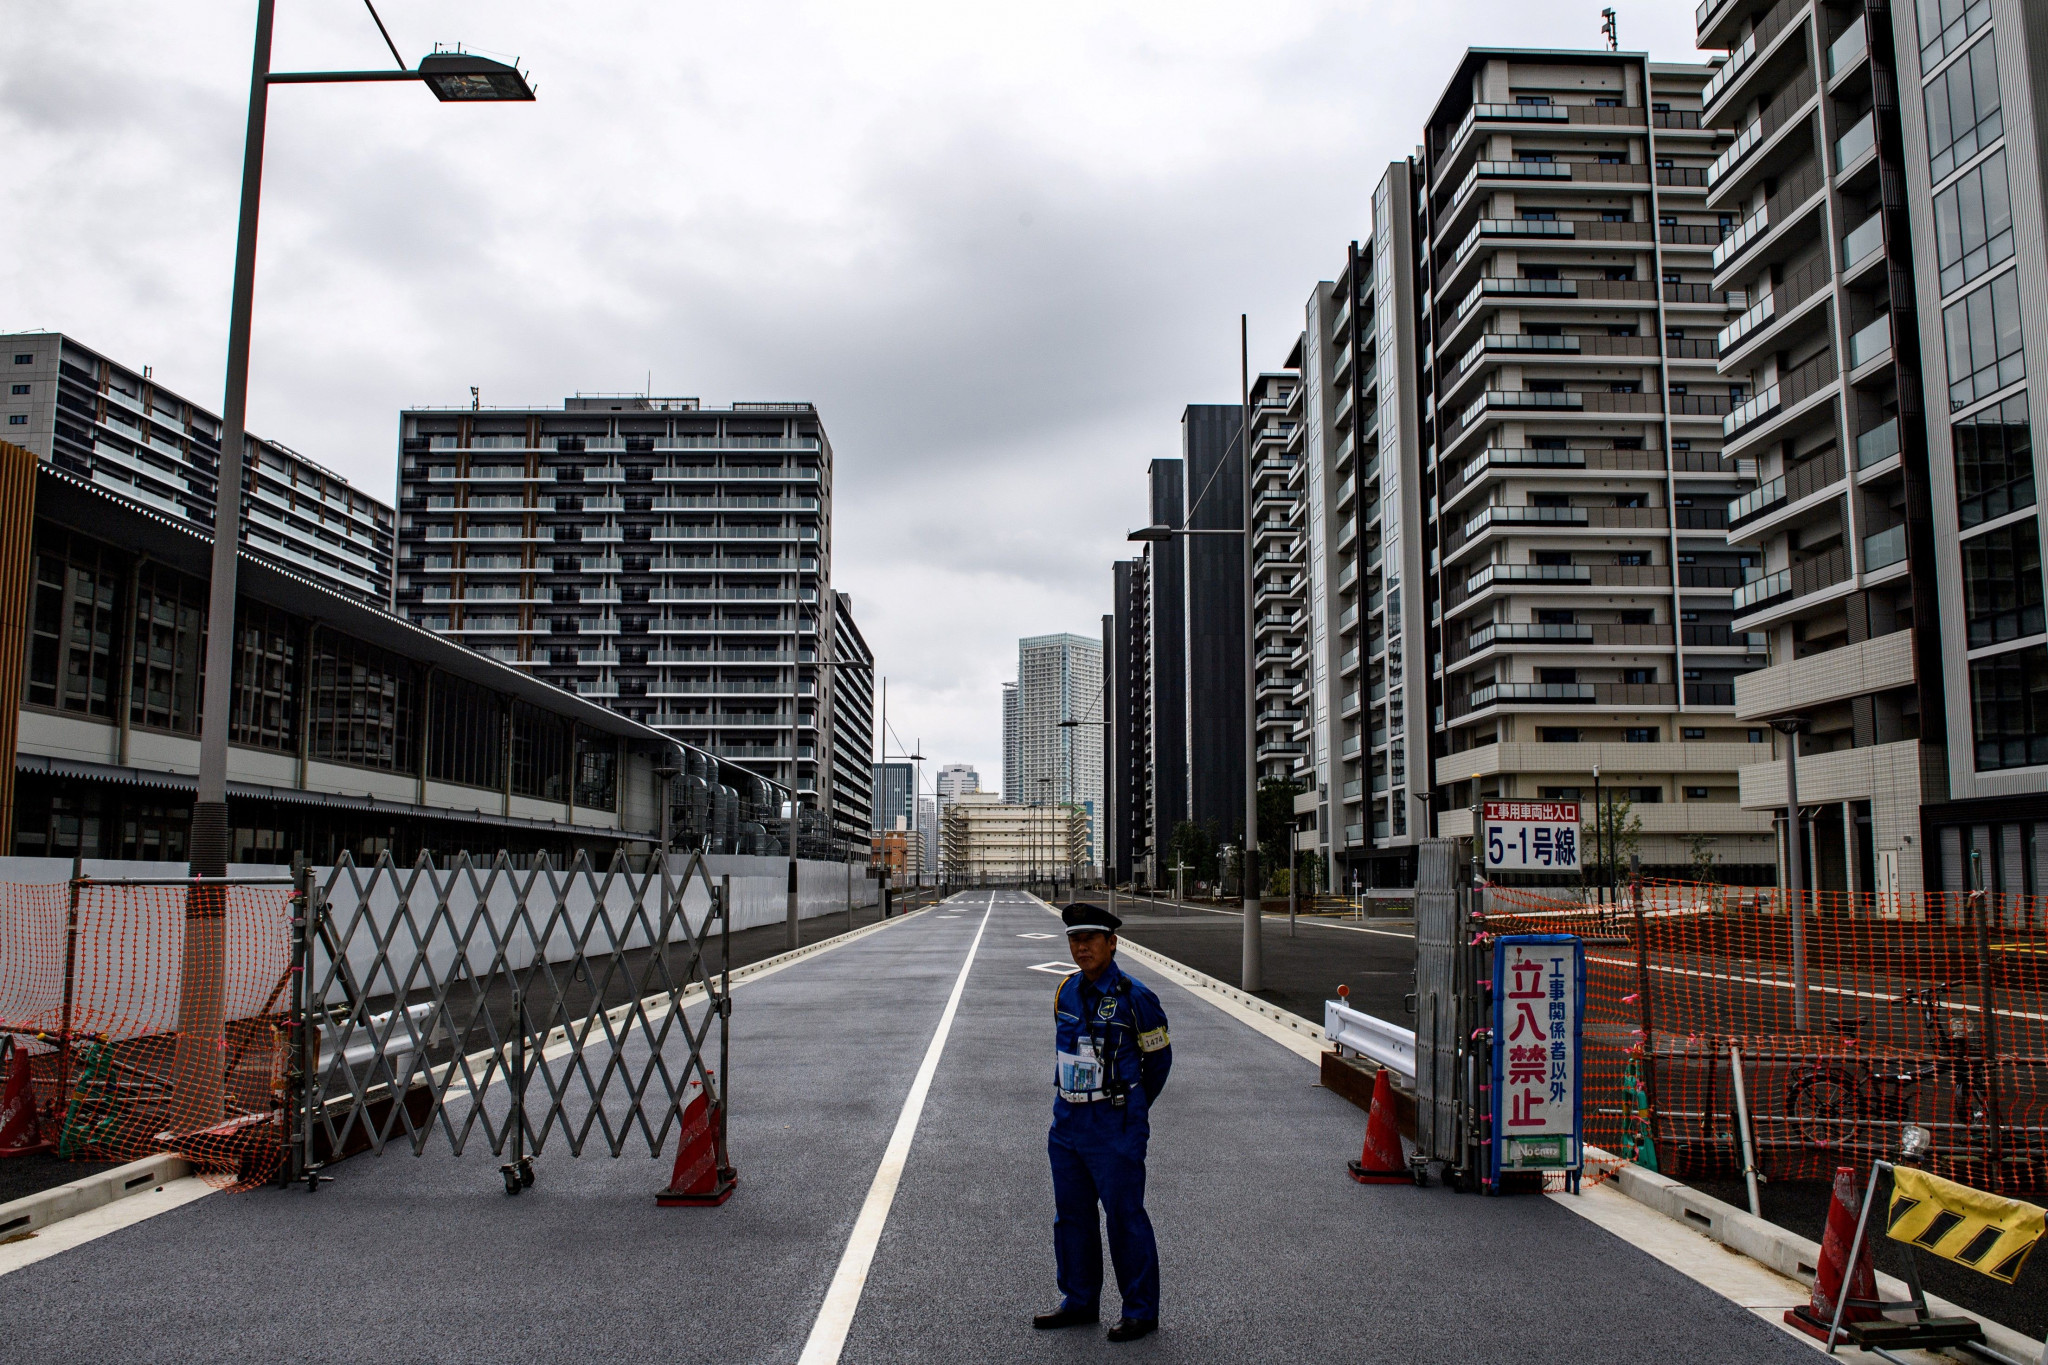 Competitors time in the Tokyo 2020 Athletes' Village will be limited, the IOC have warned ©Getty Images